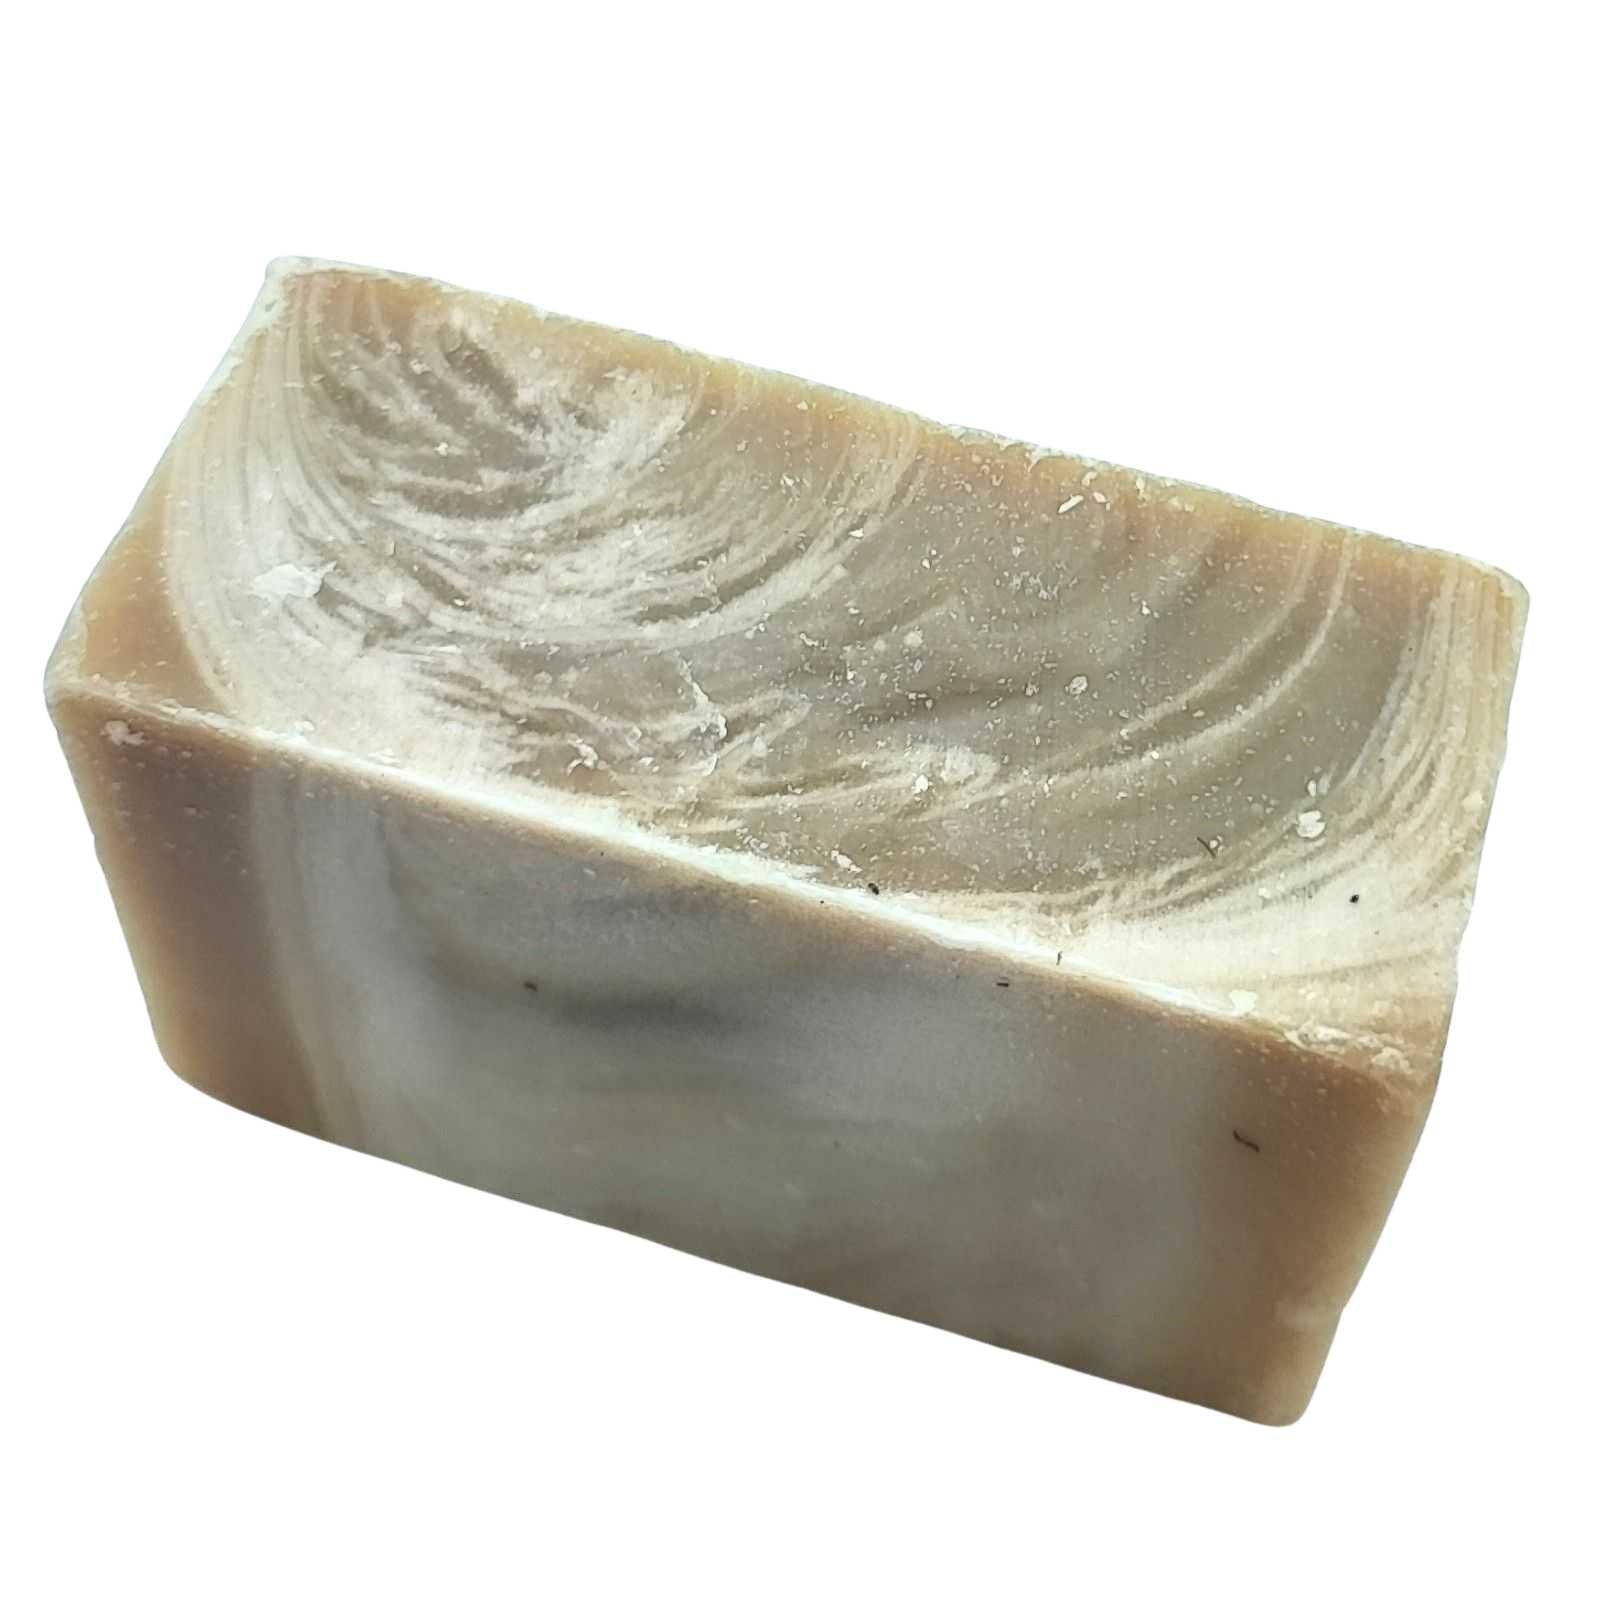 Soap Bar -White Cranberry 5oz/140g -Fruity Scent -Aromes Evasions 